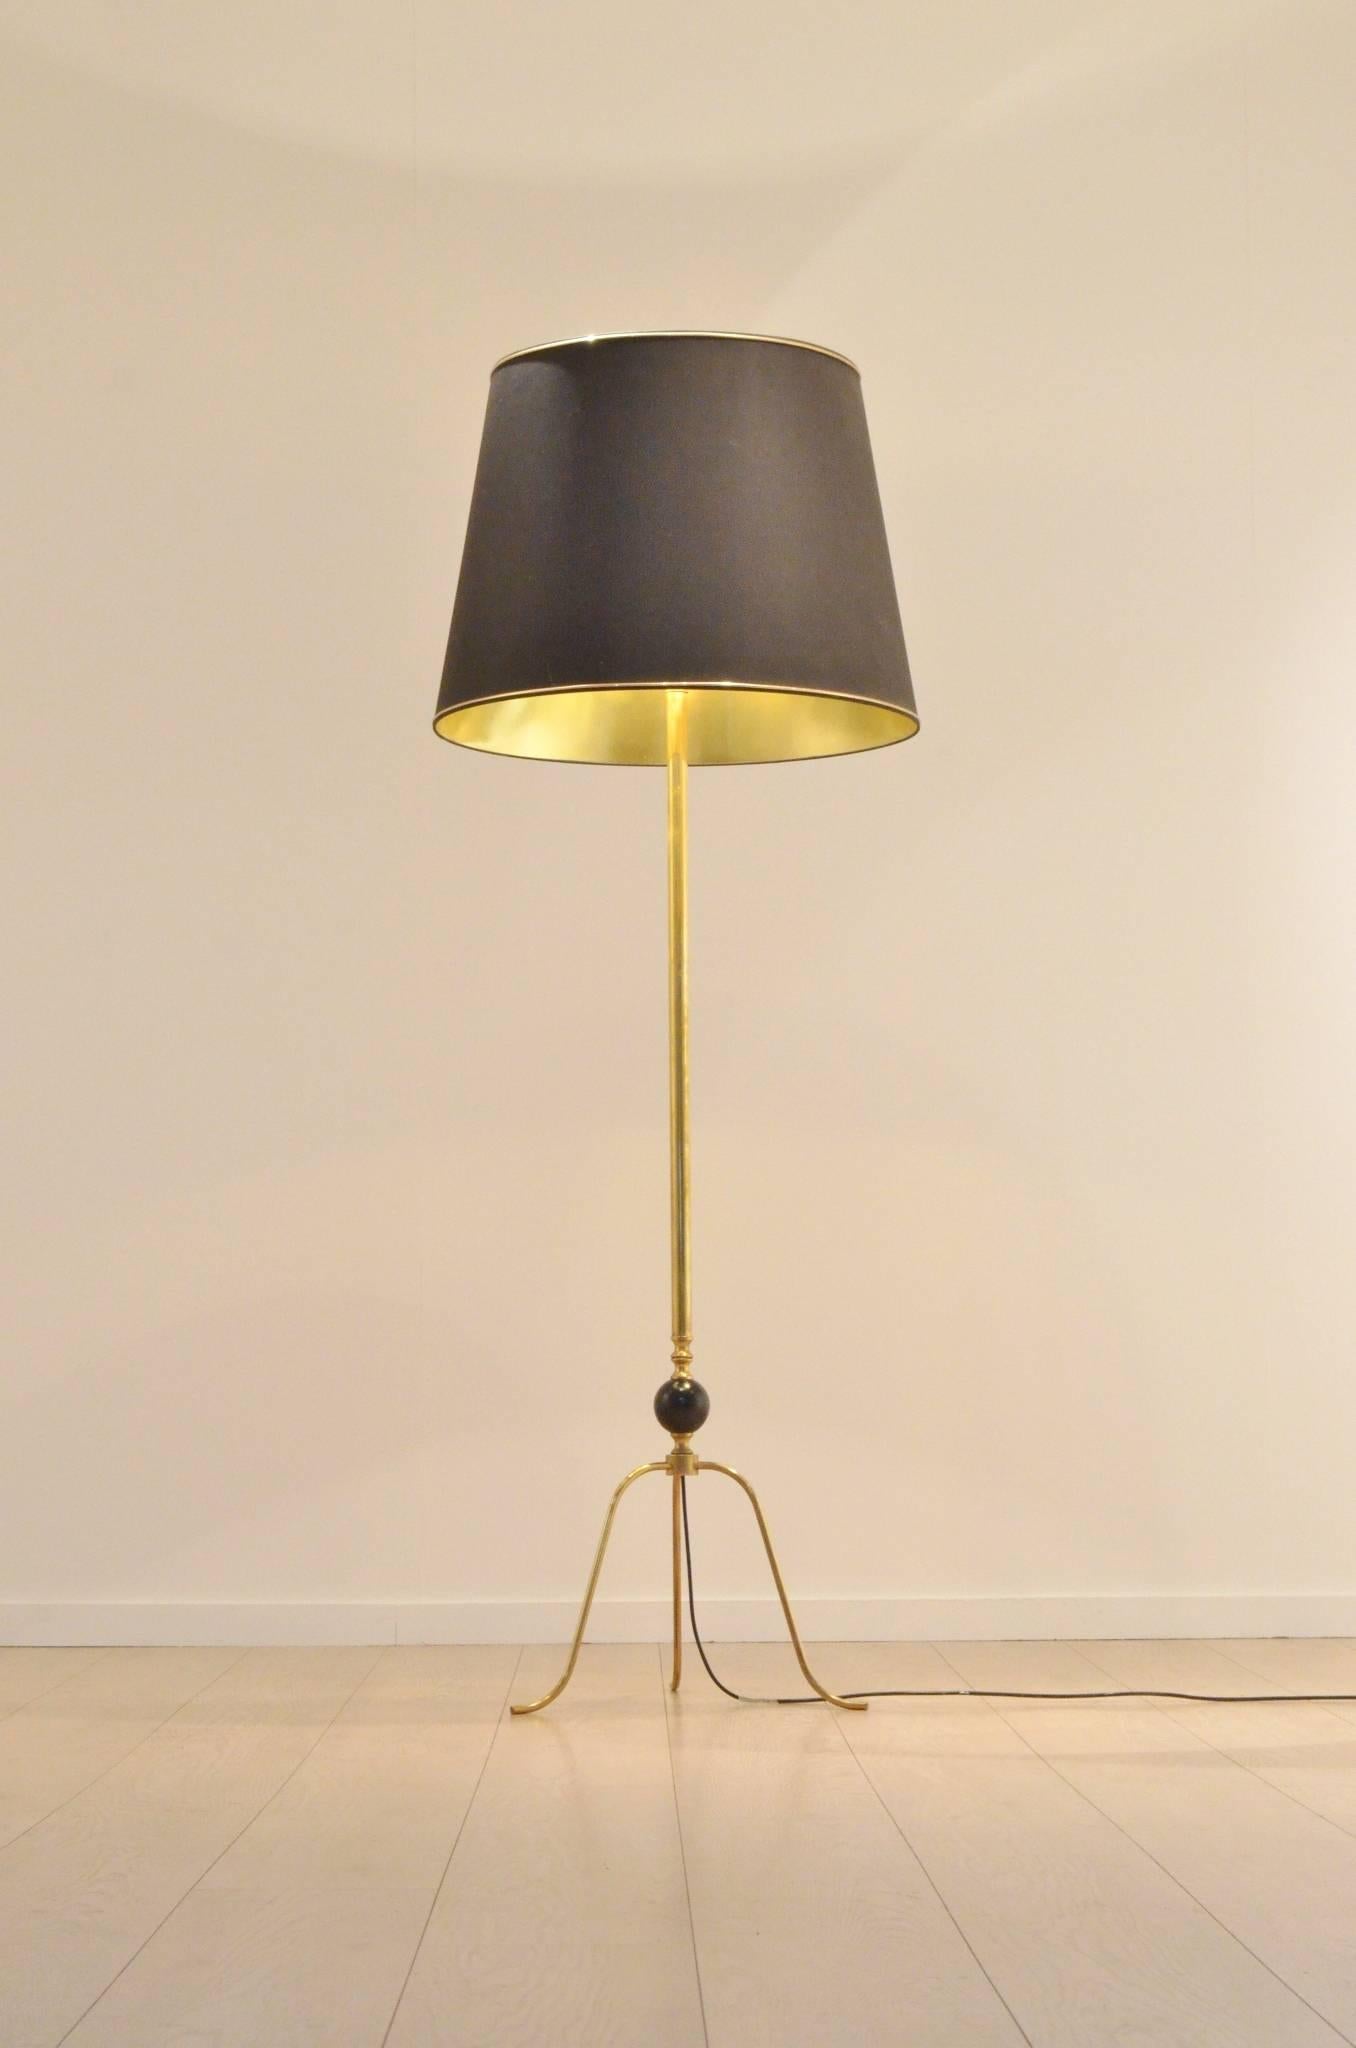 Decorative 1950s minimalistic floor lamp full brass structure and tripod feet. One black painted wood ball insertion. Black textile shade with golden inner lining.